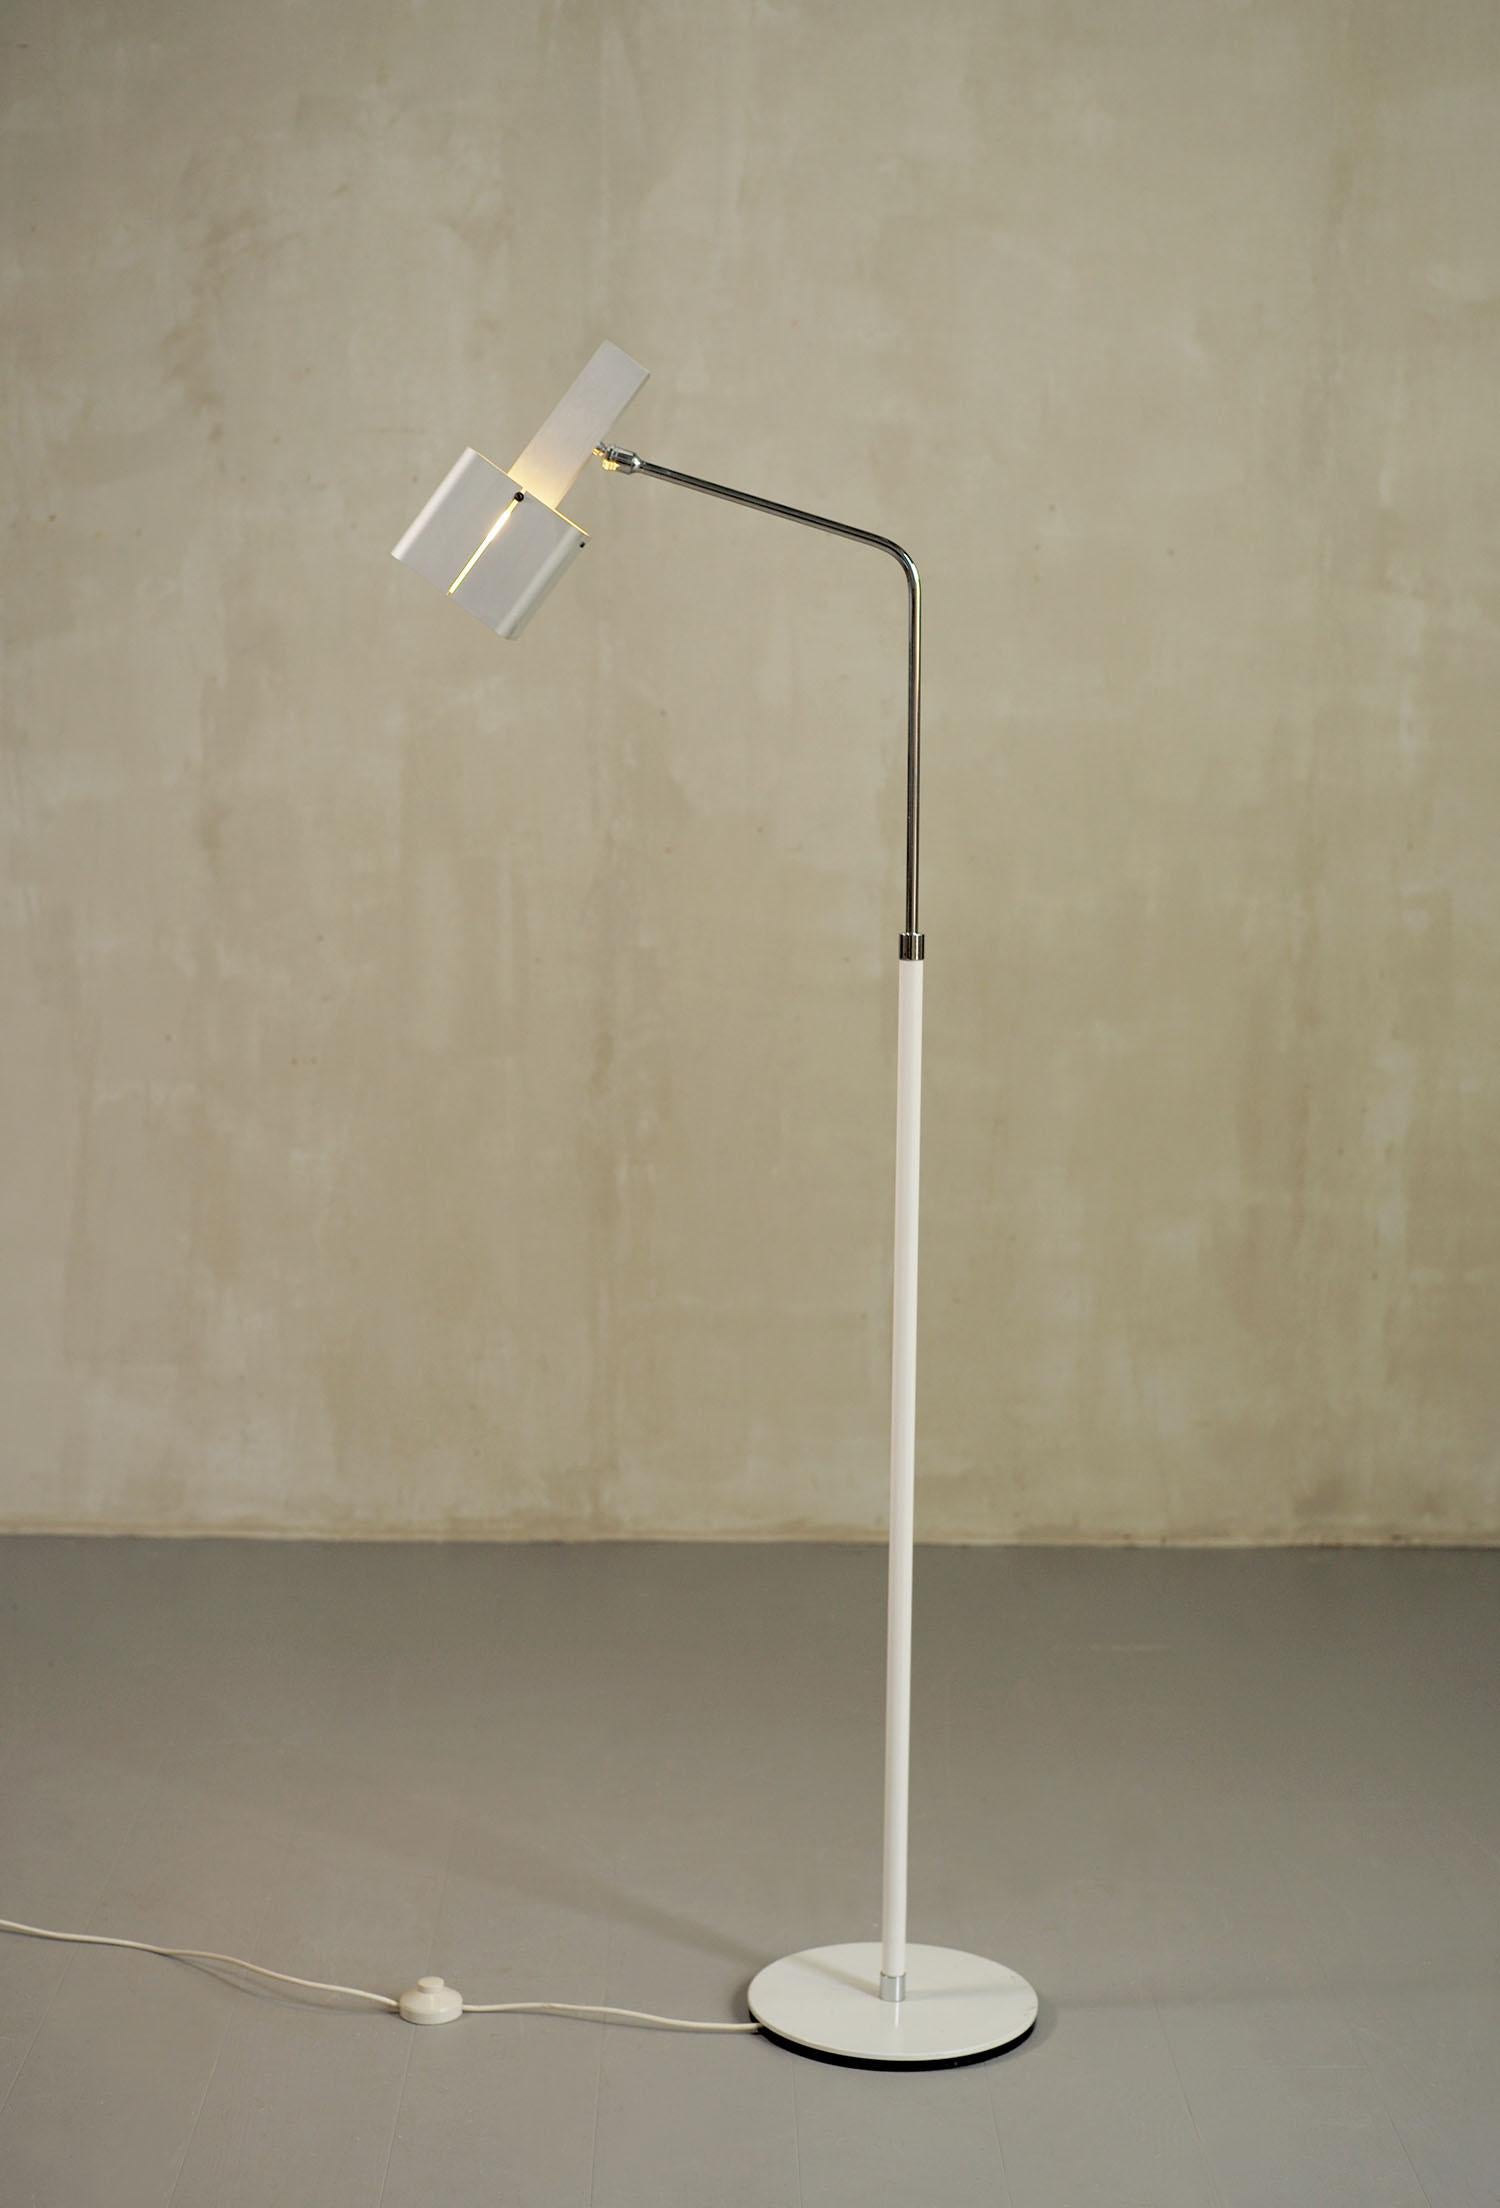 Etienne Fermigier, Floor Lamp F177, France, 1970 In Good Condition For Sale In Catonvielle, FR